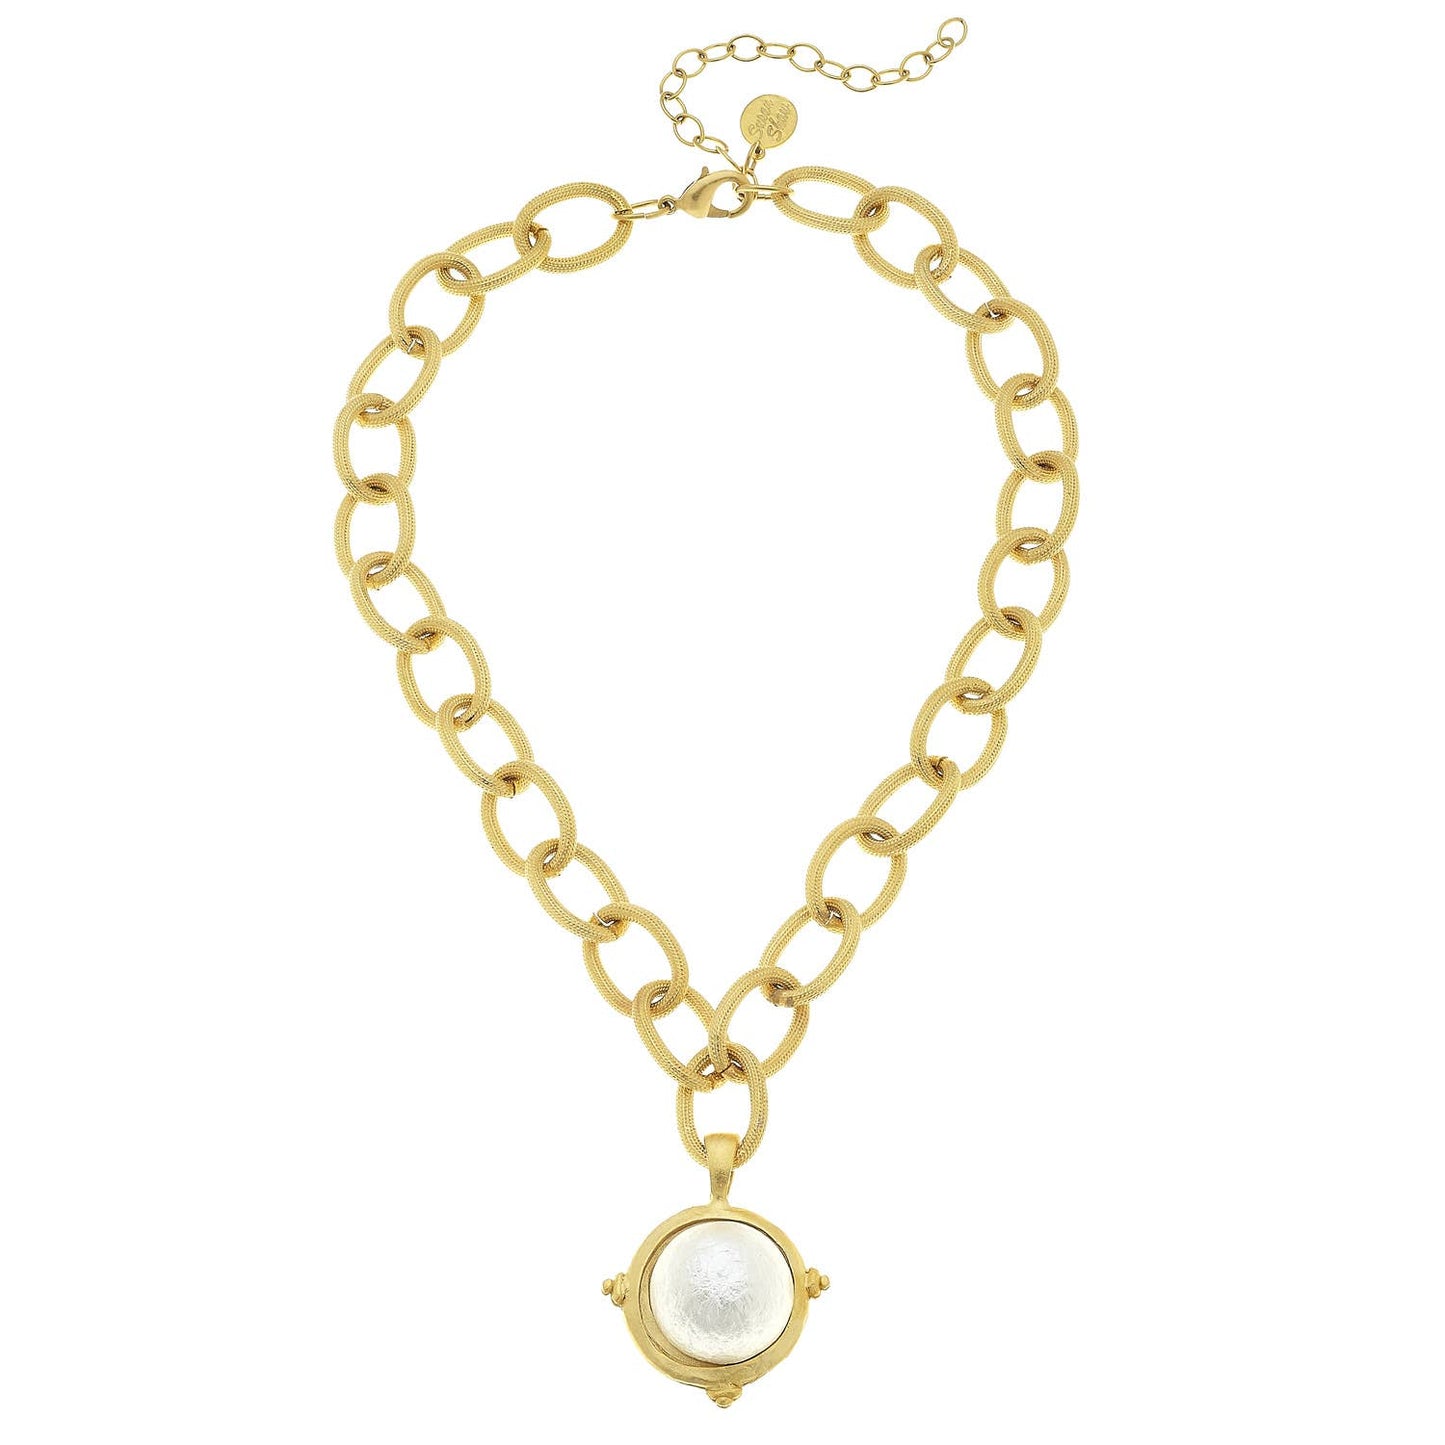 Cotton Pearl on Handcast Gold Chain Necklace